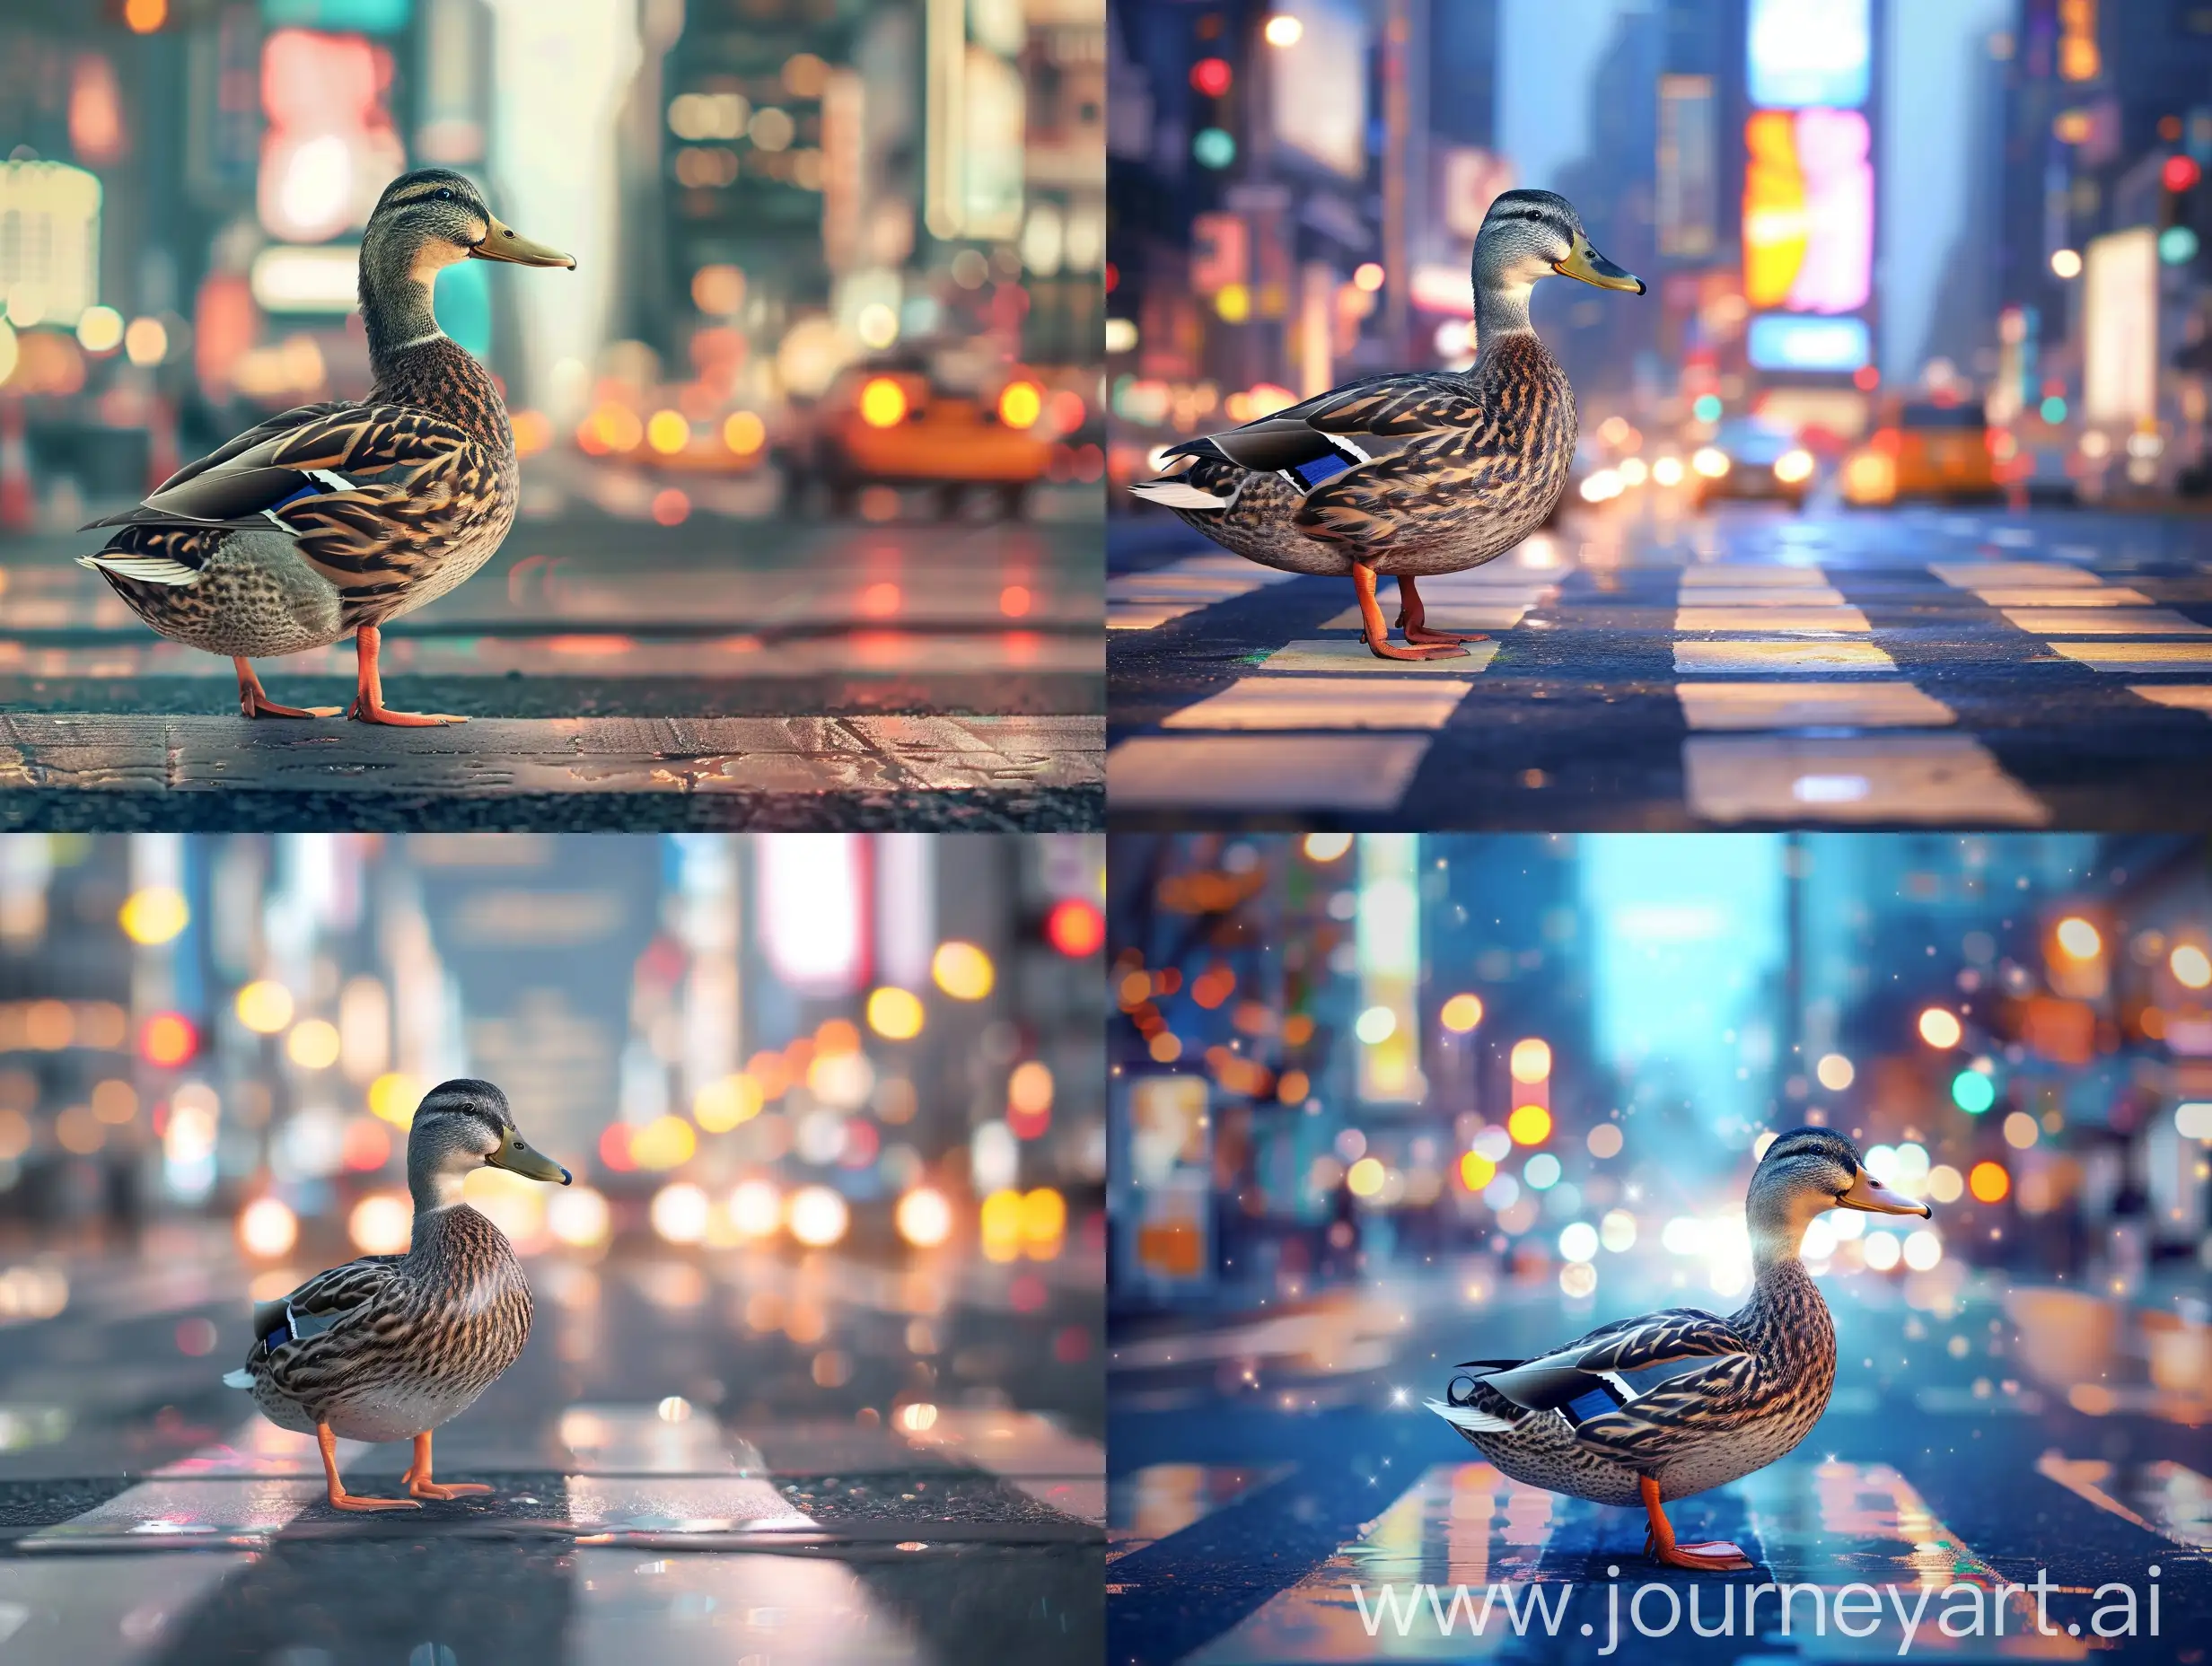 Curious-Duck-Observing-Bright-City-Lights-at-Zebra-Crossing